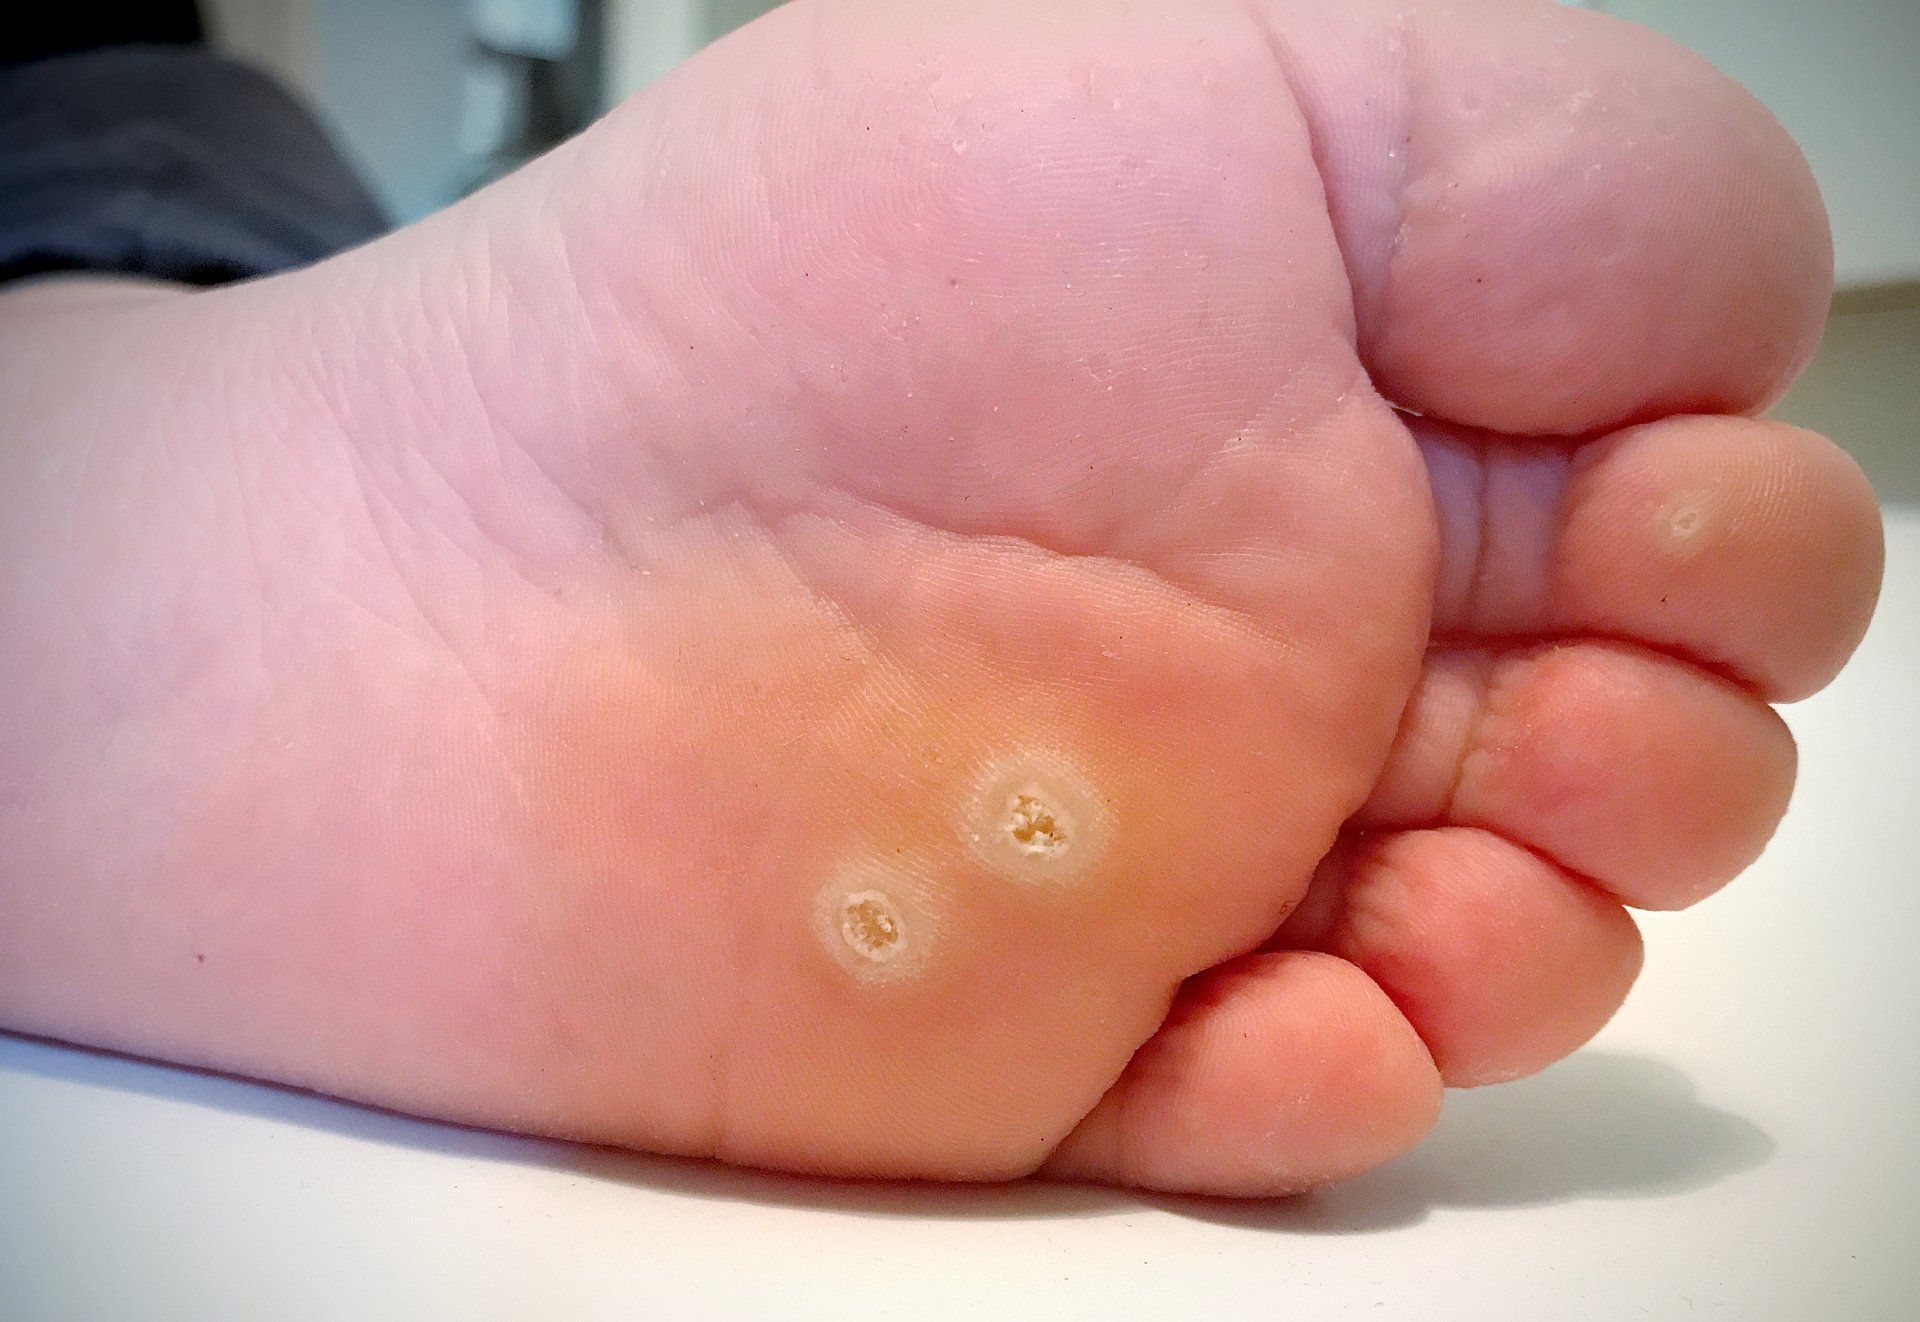 Bottom a man's left foot with plantar warts (warts on the bottom of the foot)